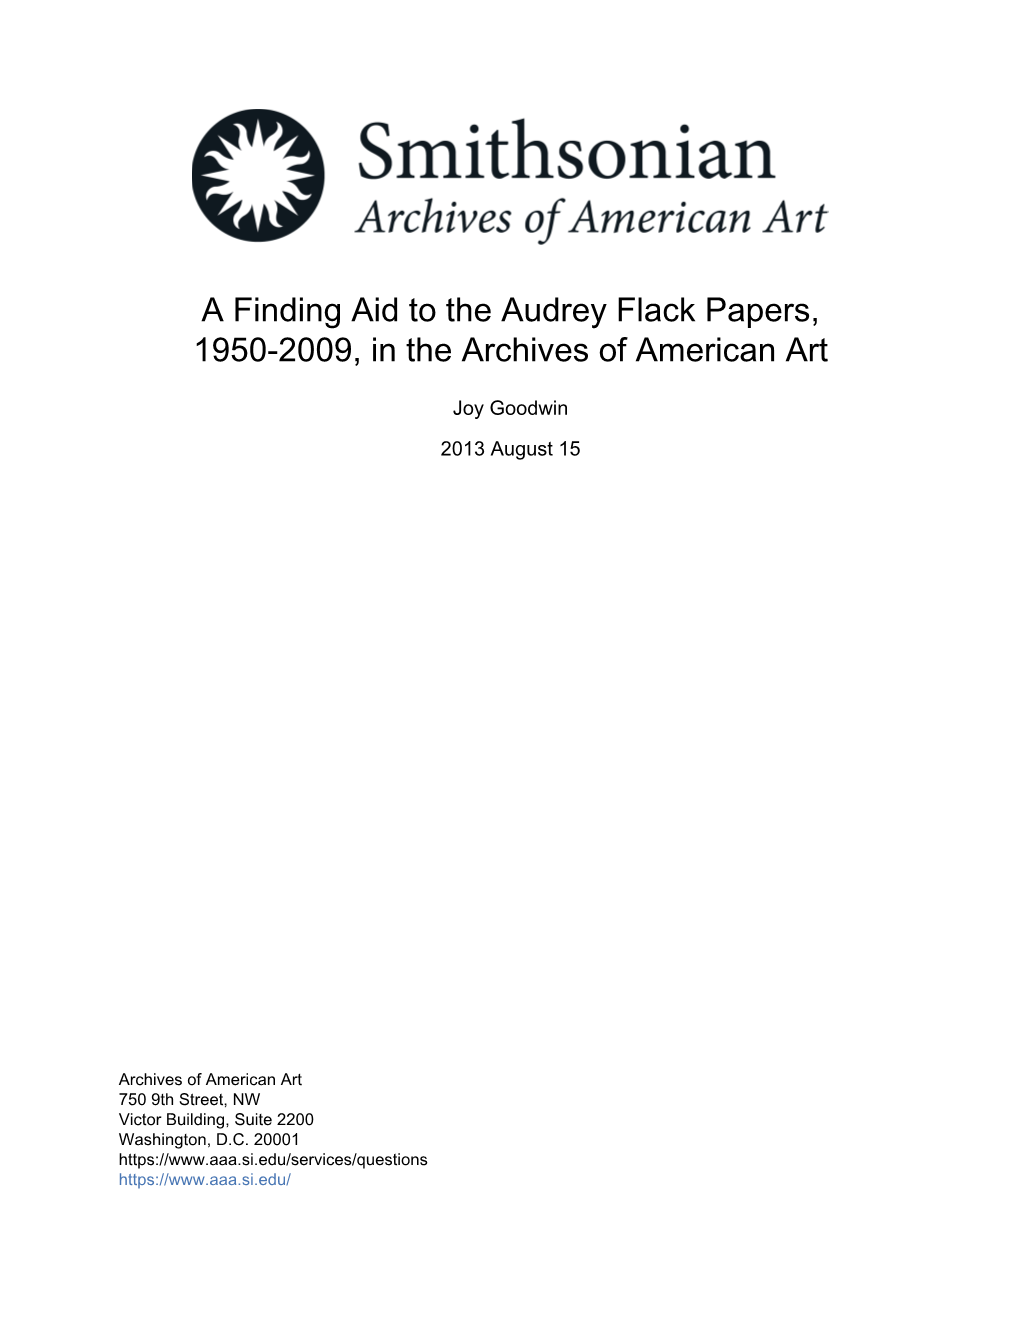 A Finding Aid to the Audrey Flack Papers, 1950-2009, in the Archives of American Art